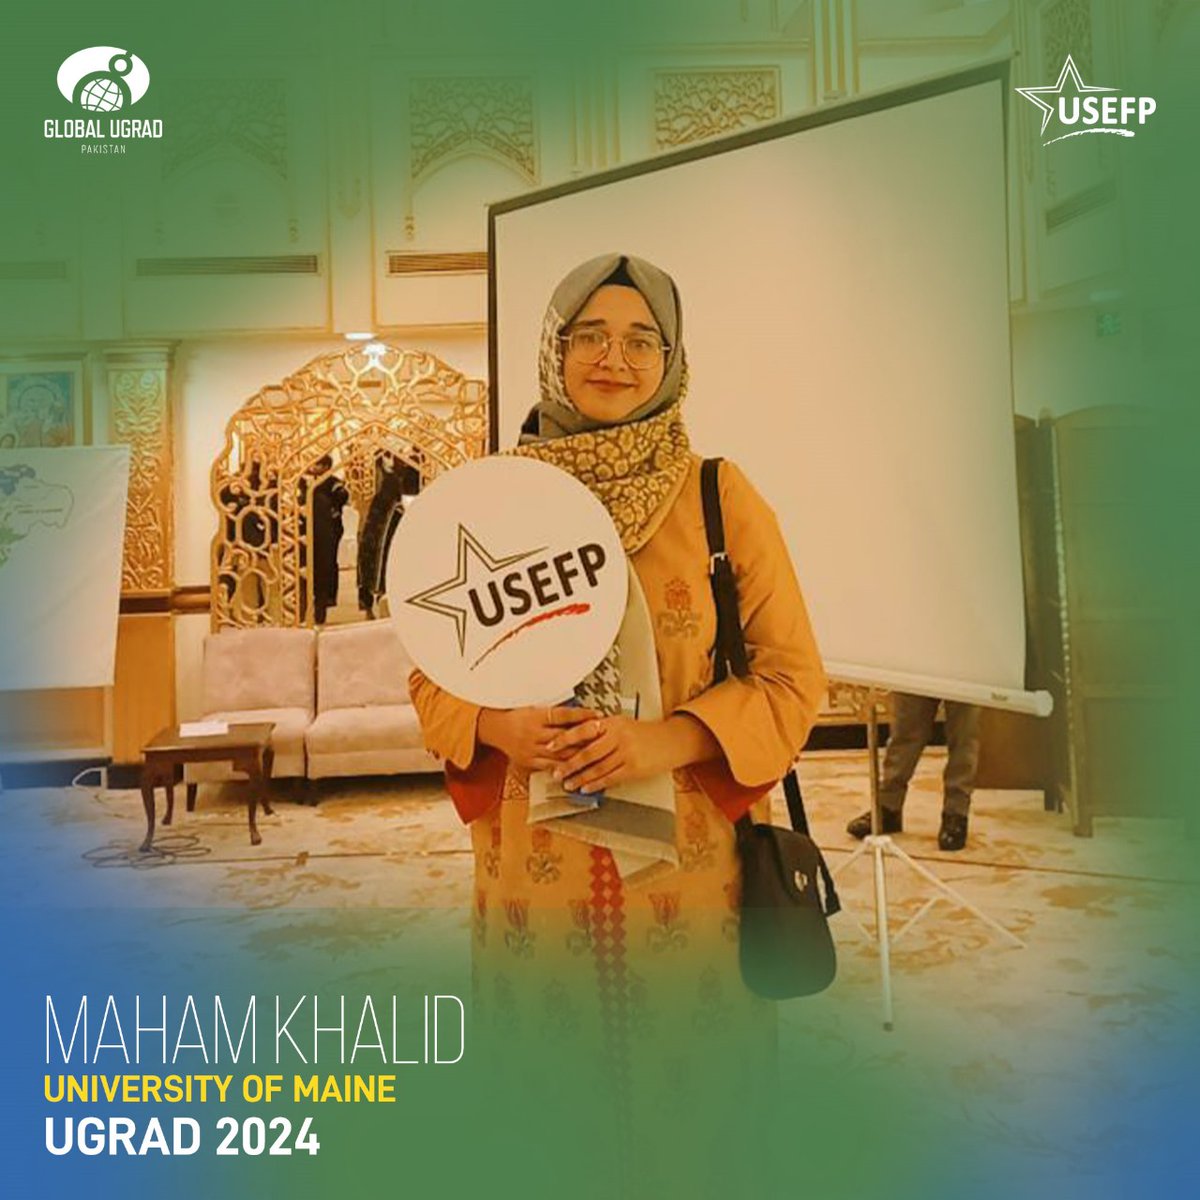 'The Global UGRAD Pakistan Program gave me the chance to step out of my comfort zone, experience a different culture, become independent and confident, and represent my country, and for that, I am forever grateful,' shares Maham. #USEFP #UGRAD #USPAK #Scholarship